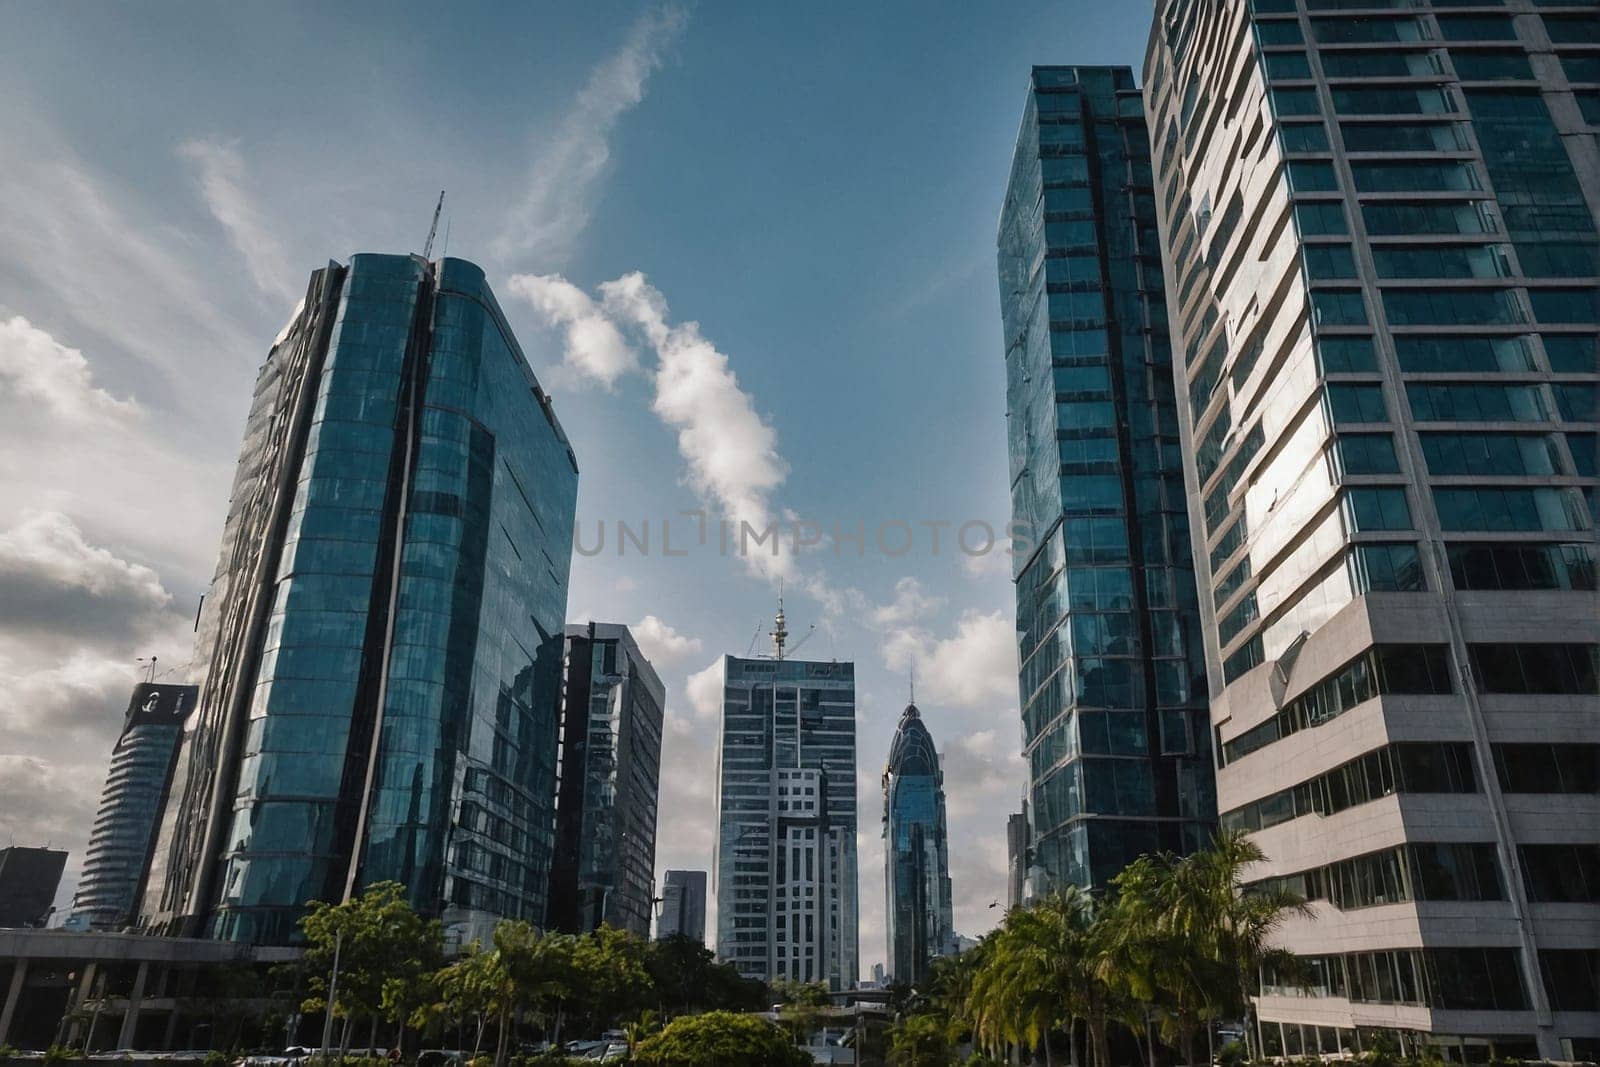 A collection of towering buildings clustered closely next to each other, creating an impressive urban skyline.